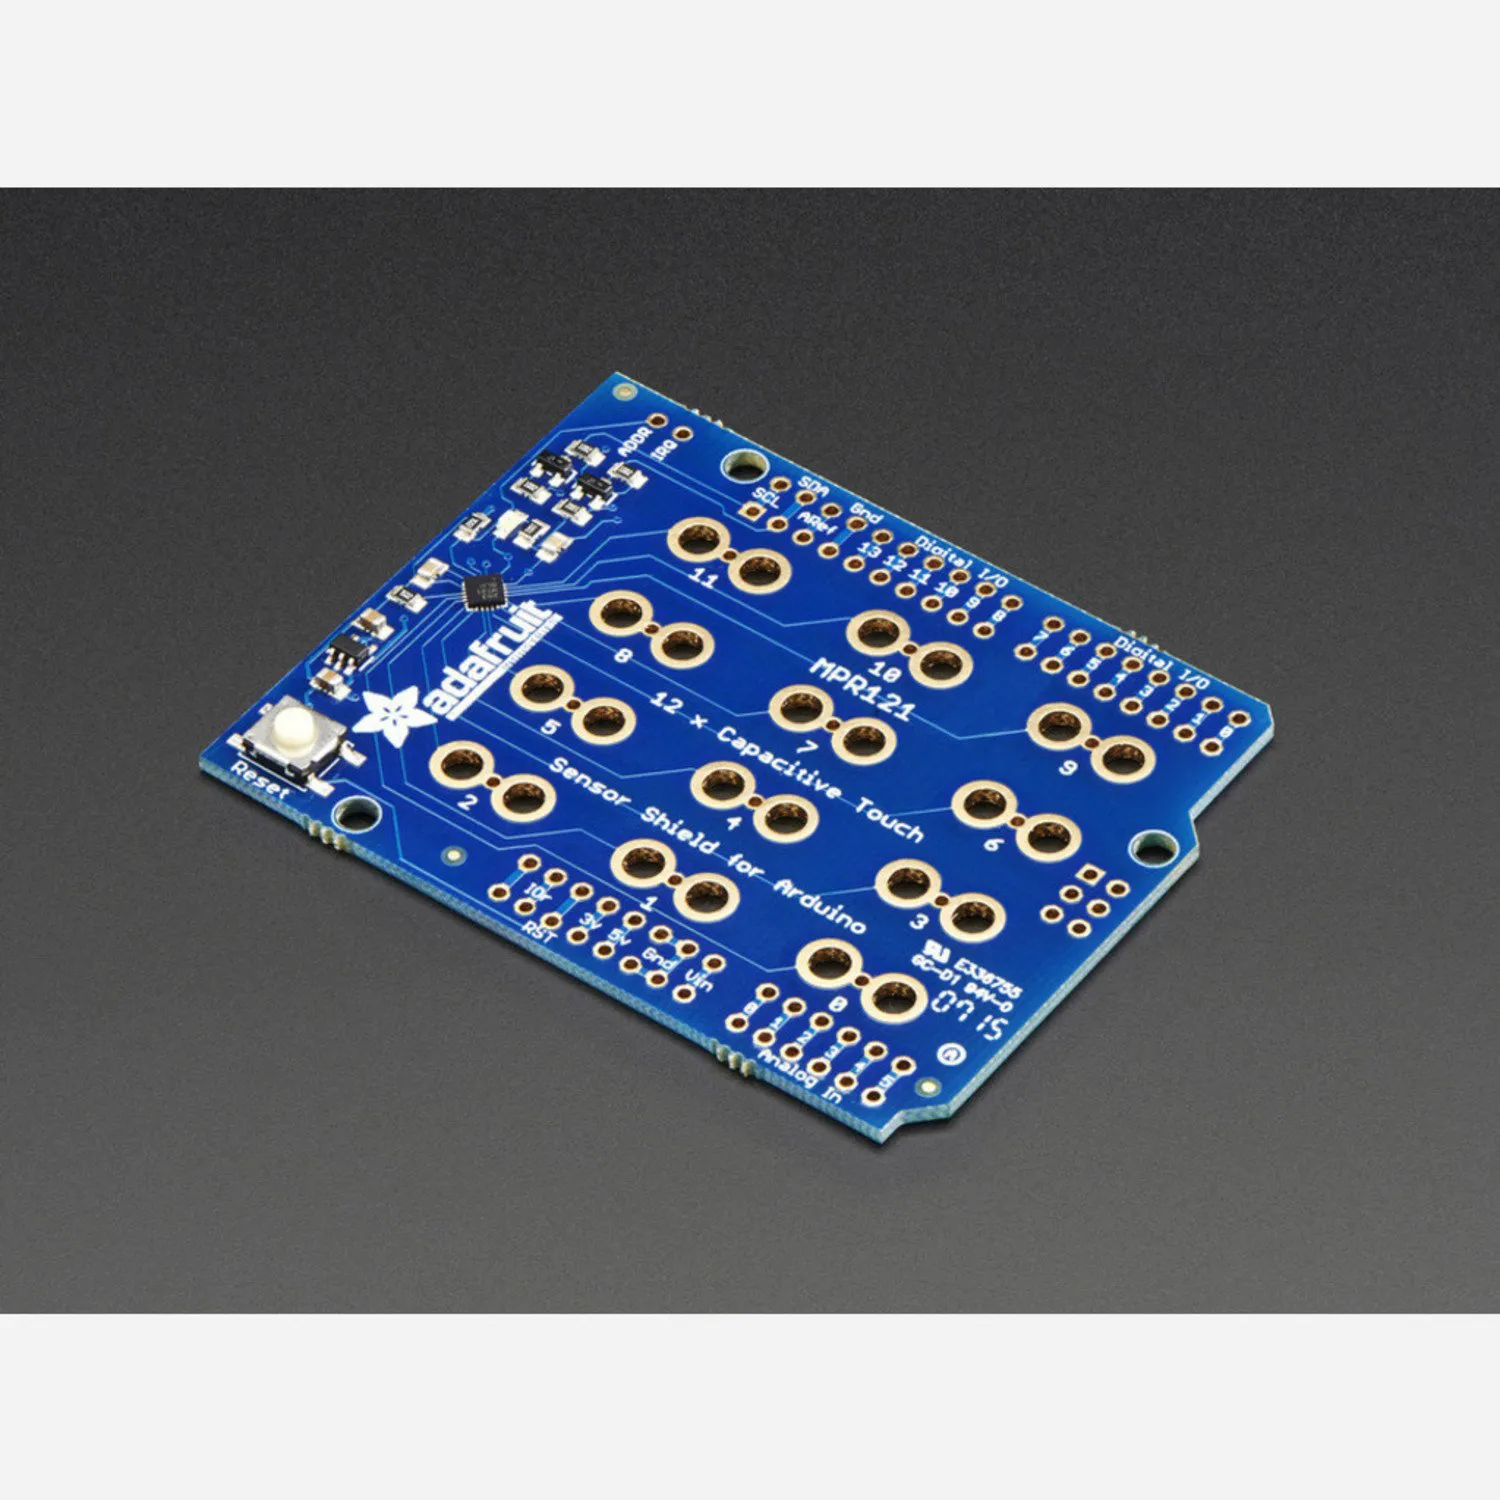 Photo of Adafruit 12 x Capacitive Touch Shield for Arduino - MPR121